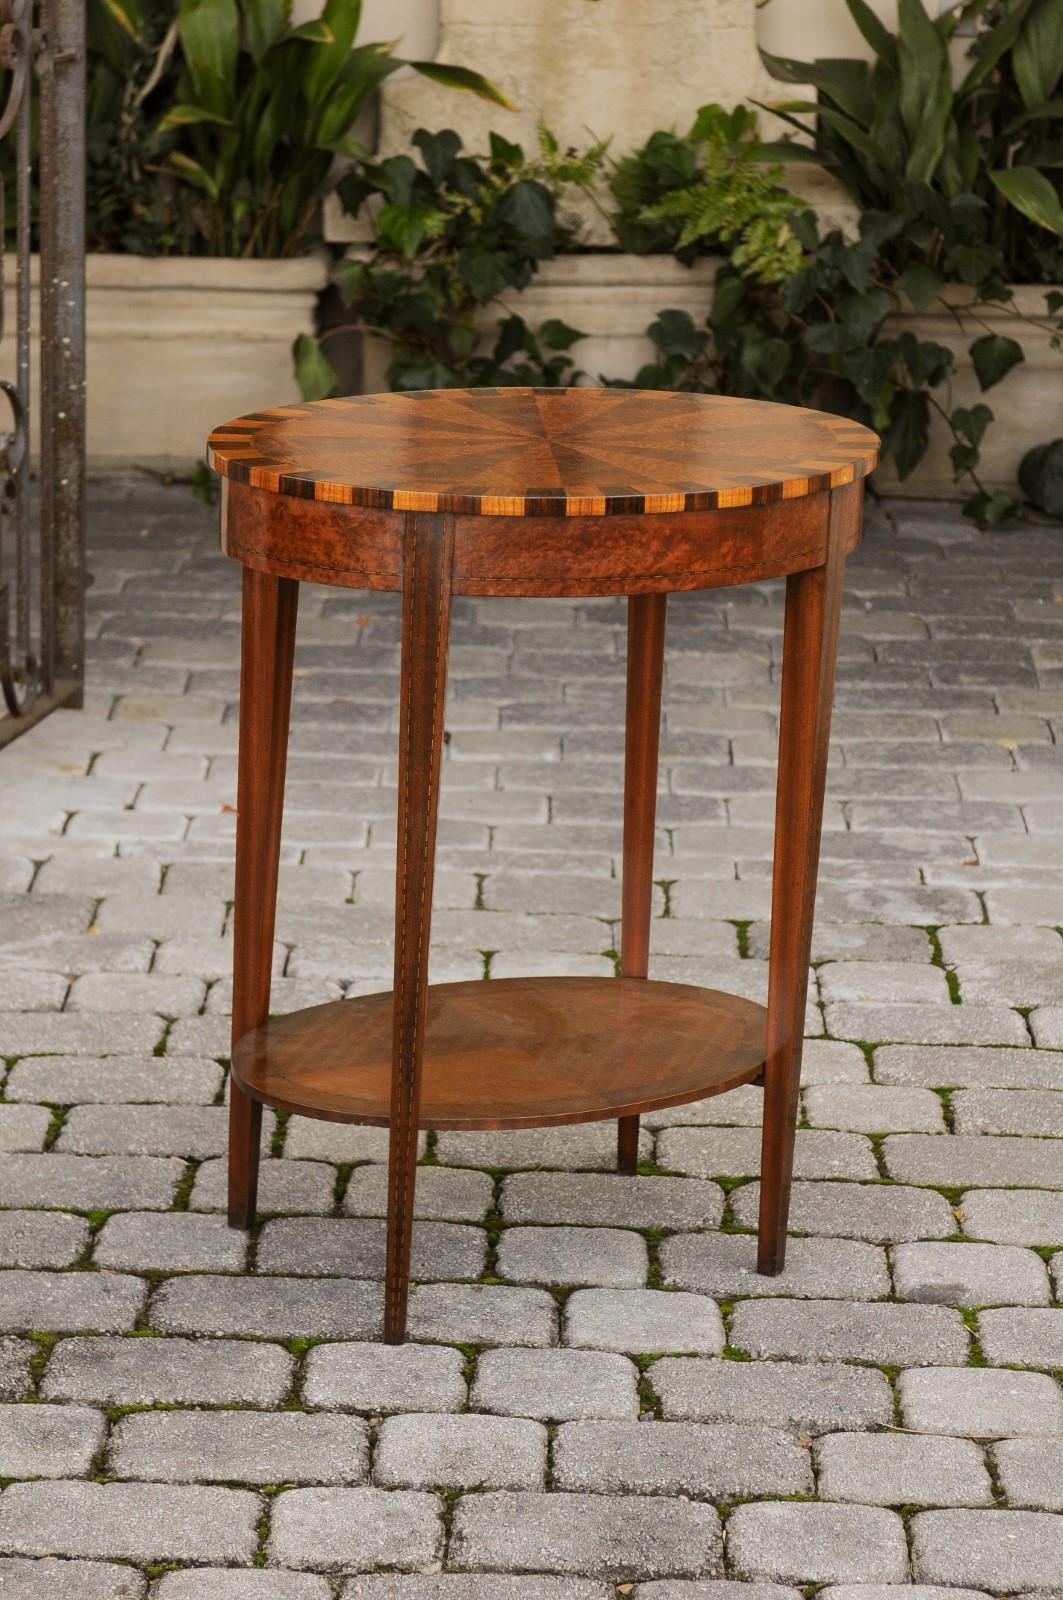 A French oval walnut side table from the mid-19th century, with radiating inlaid top and lower shelf. Born during the reign of France's last Emperor Napoleon III, this side table features an exquisite oval top, adorned with radiating motifs